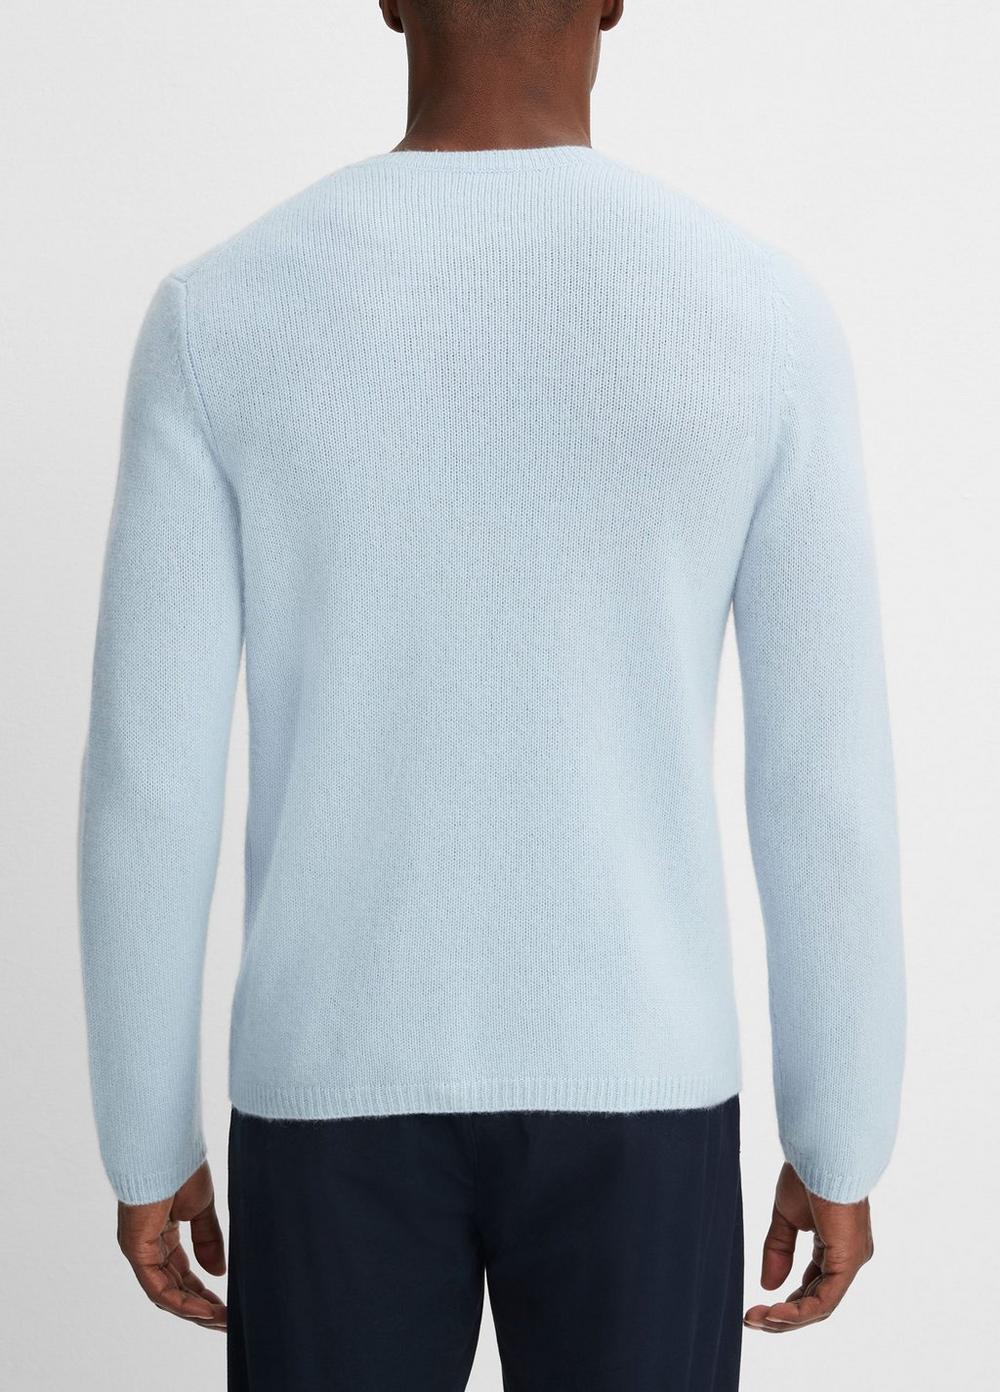 Cashmere Long Sleeve Crew Neck Sweater